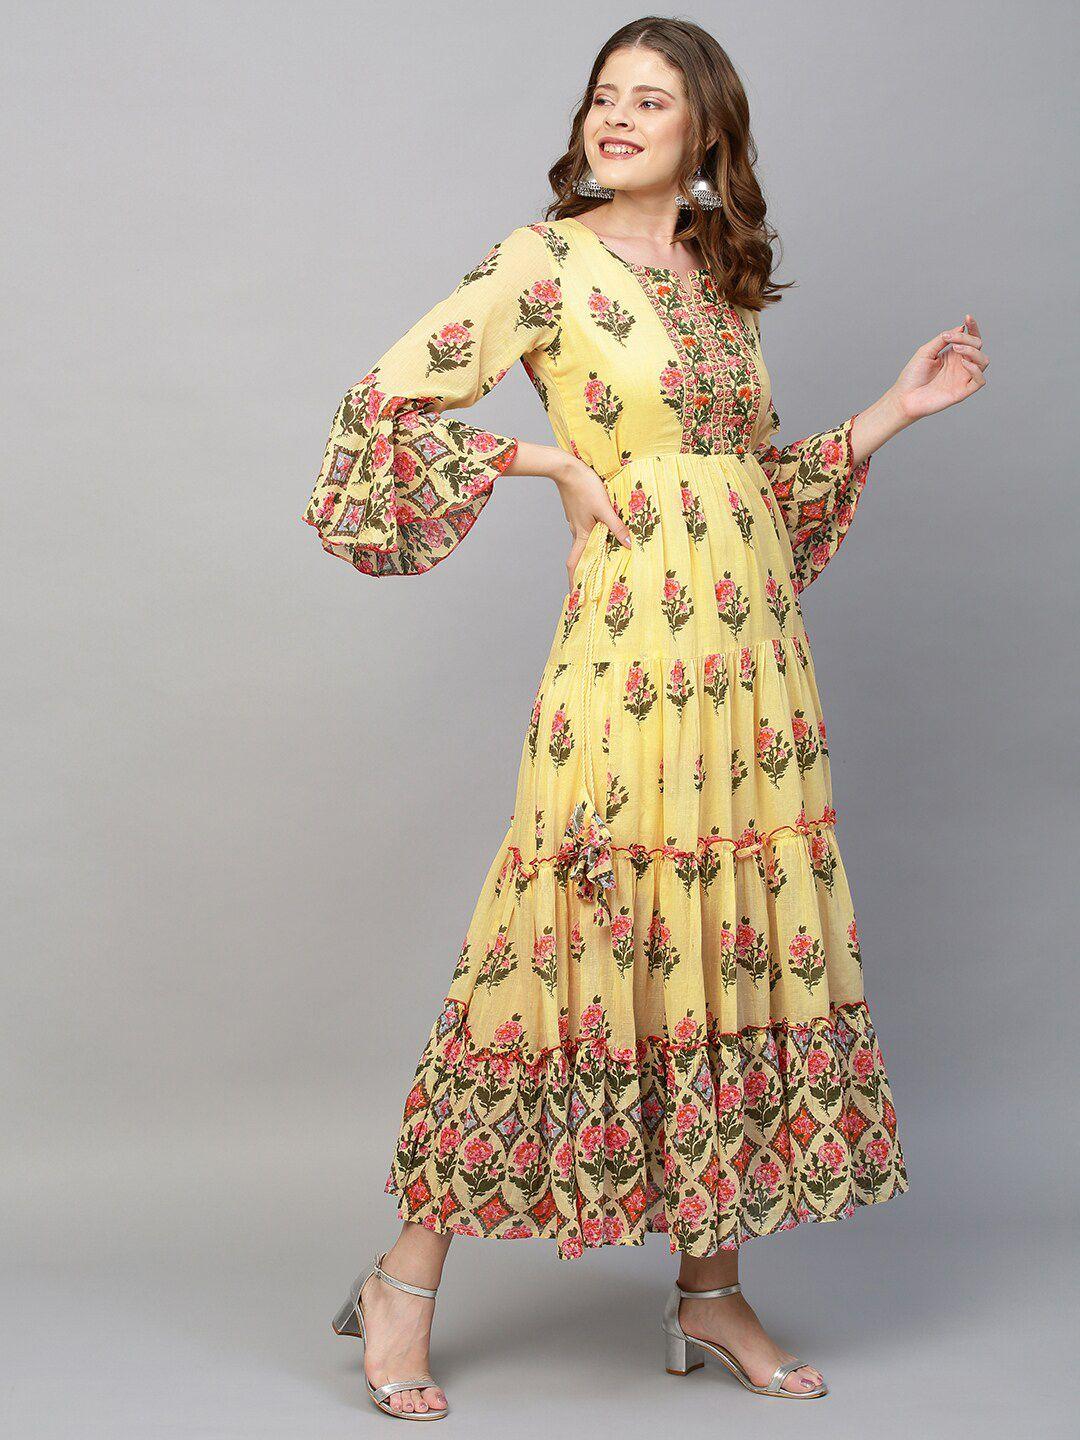 fashor yellow floral a-line dress